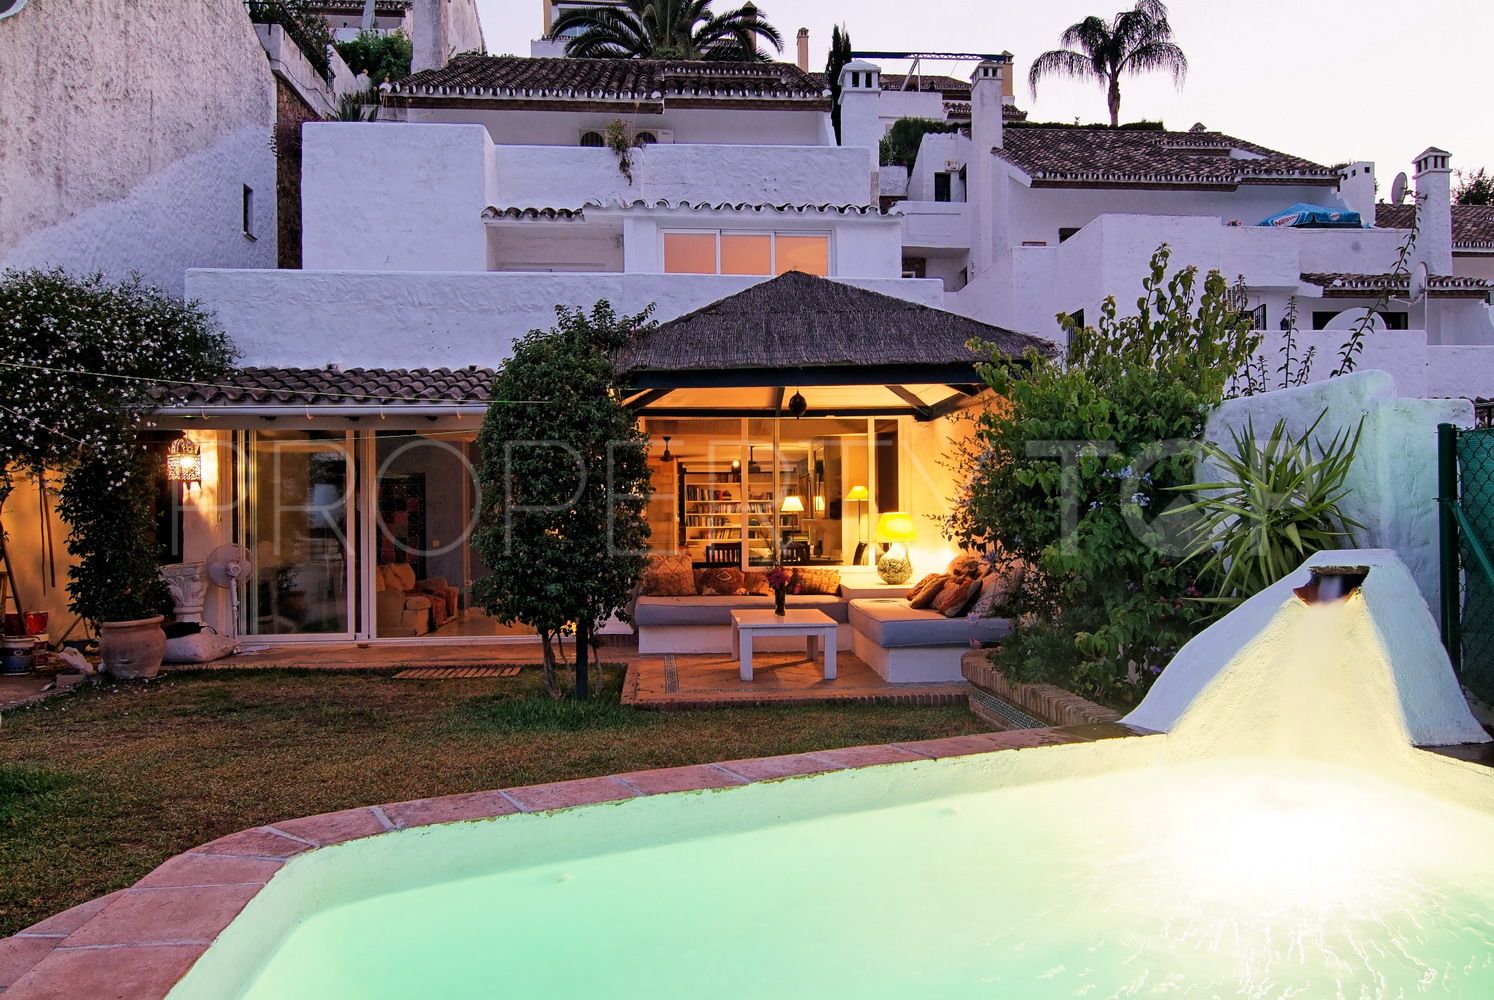 5 bedrooms town house in Nueva Andalucia for sale